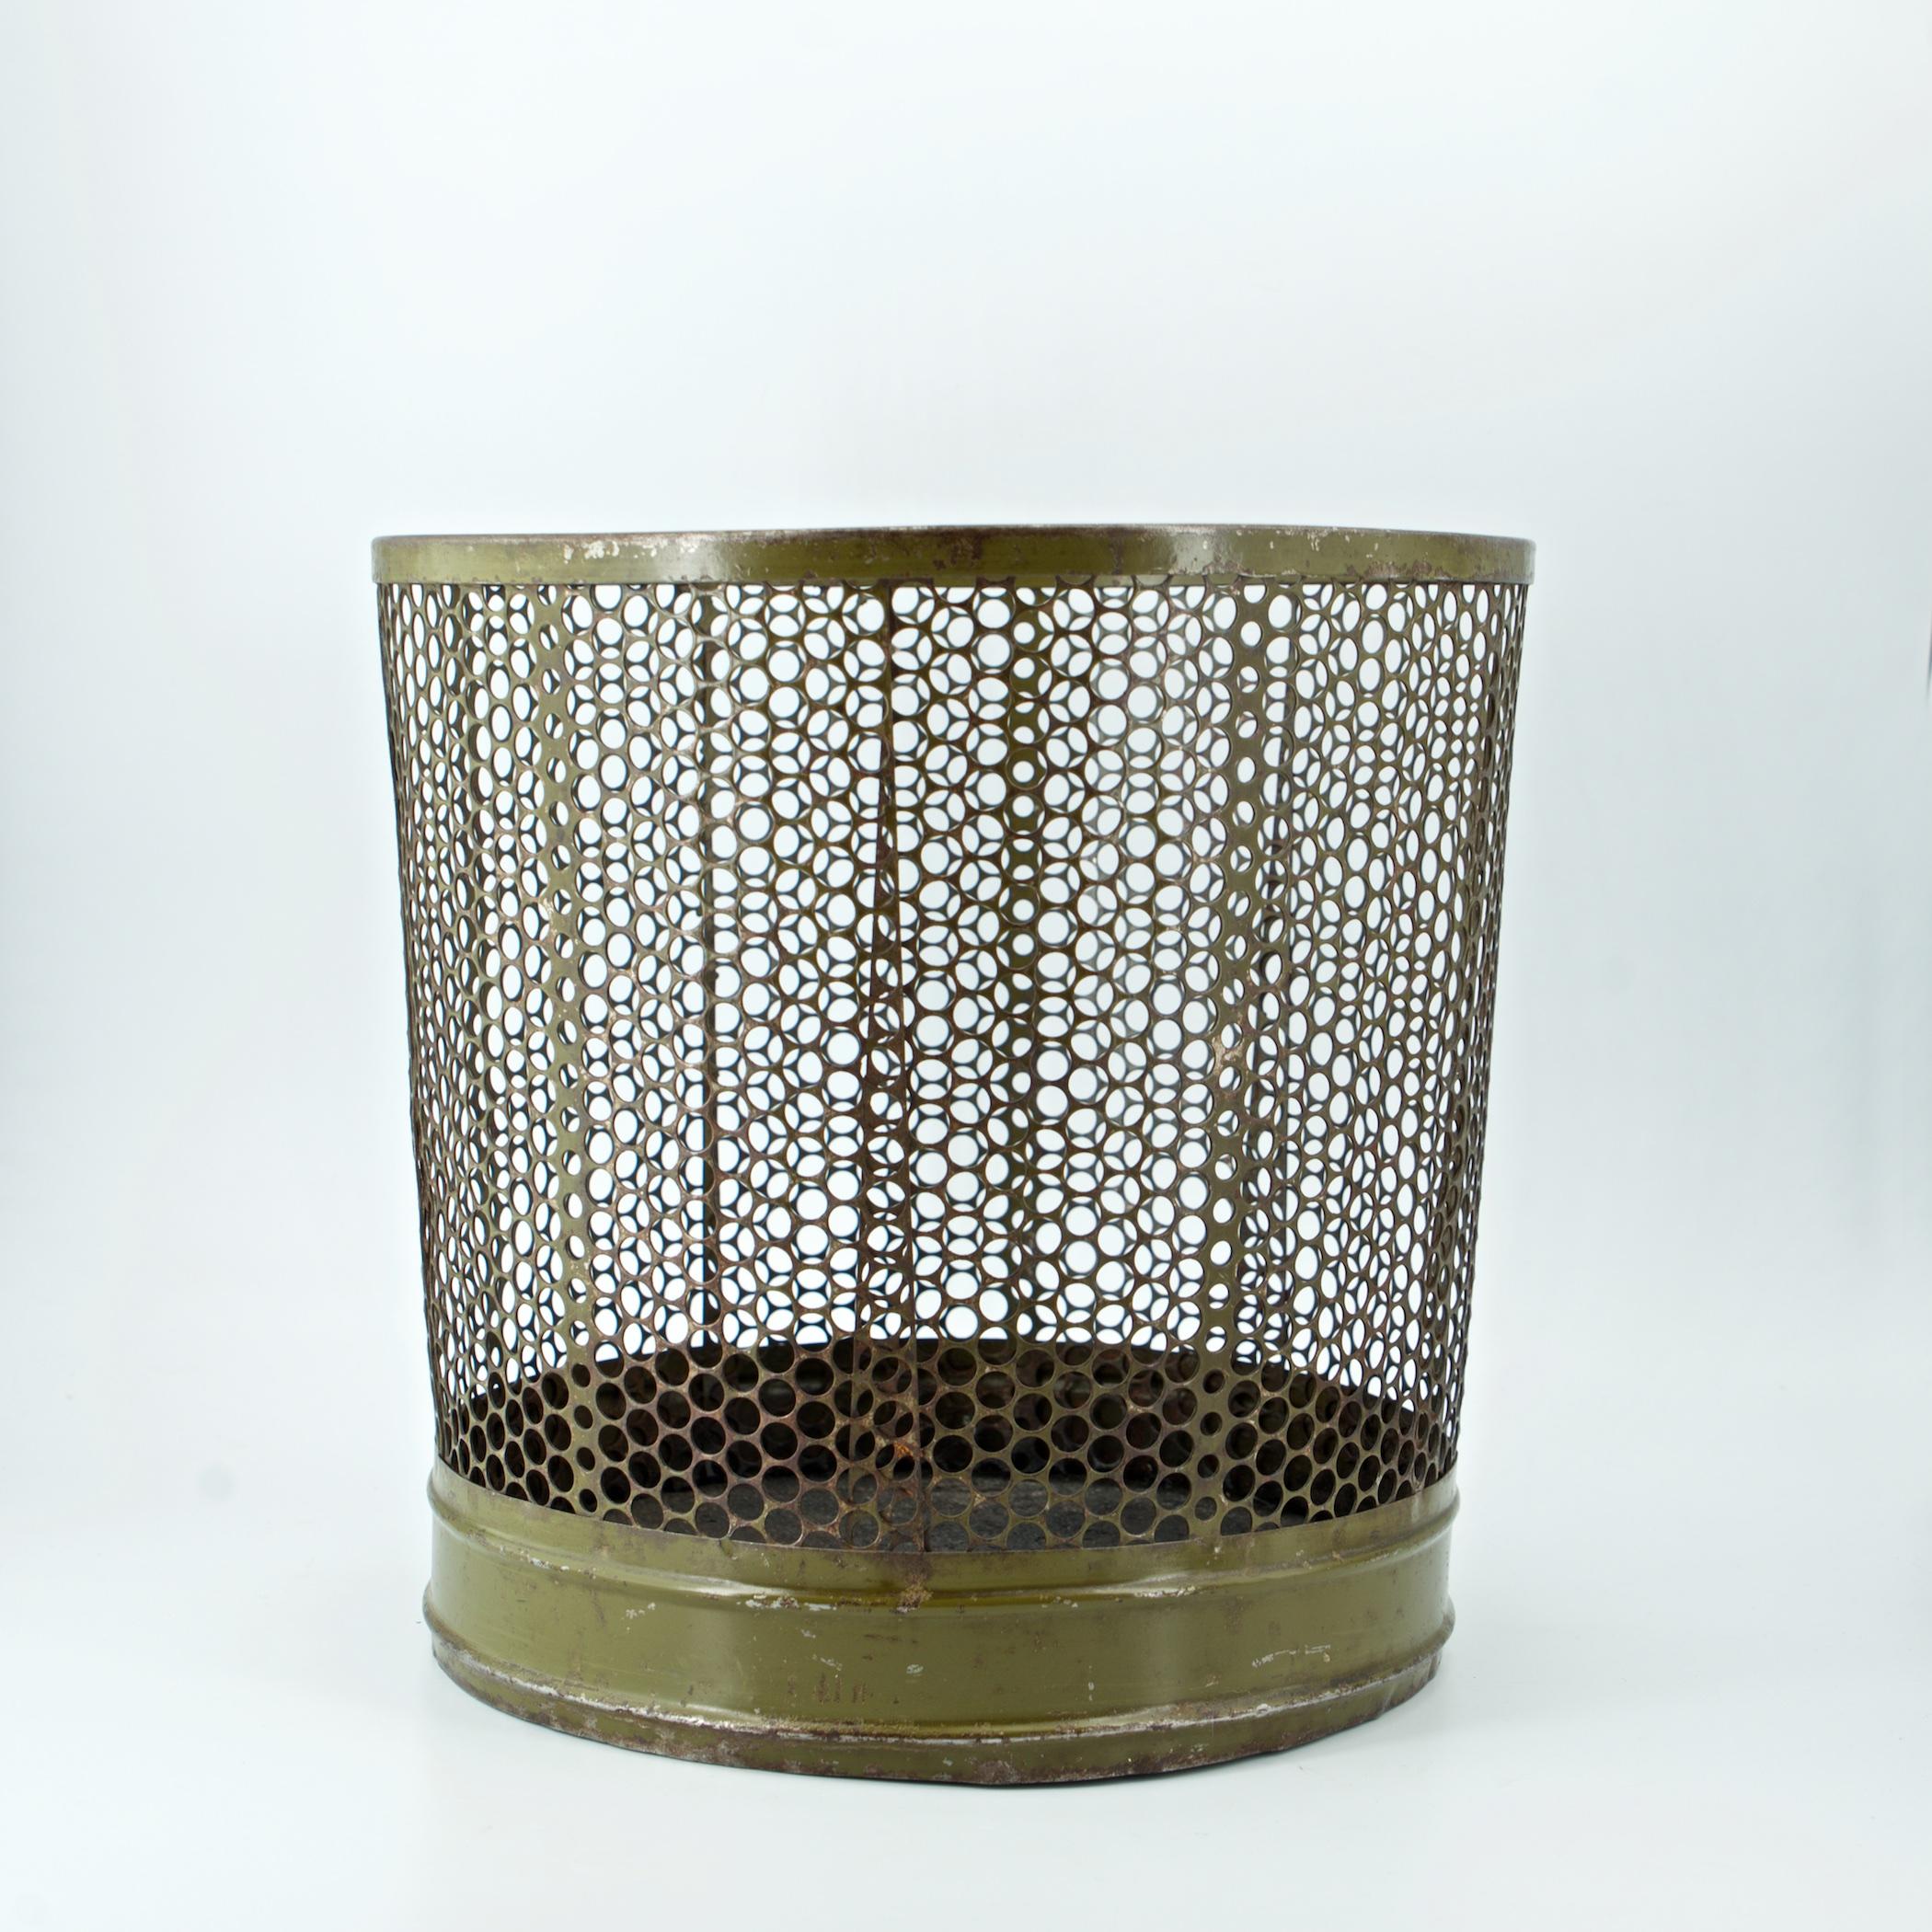 Painted 1920s Perforated Metal Industrial Factory Office Wastebasket Trash Can Green